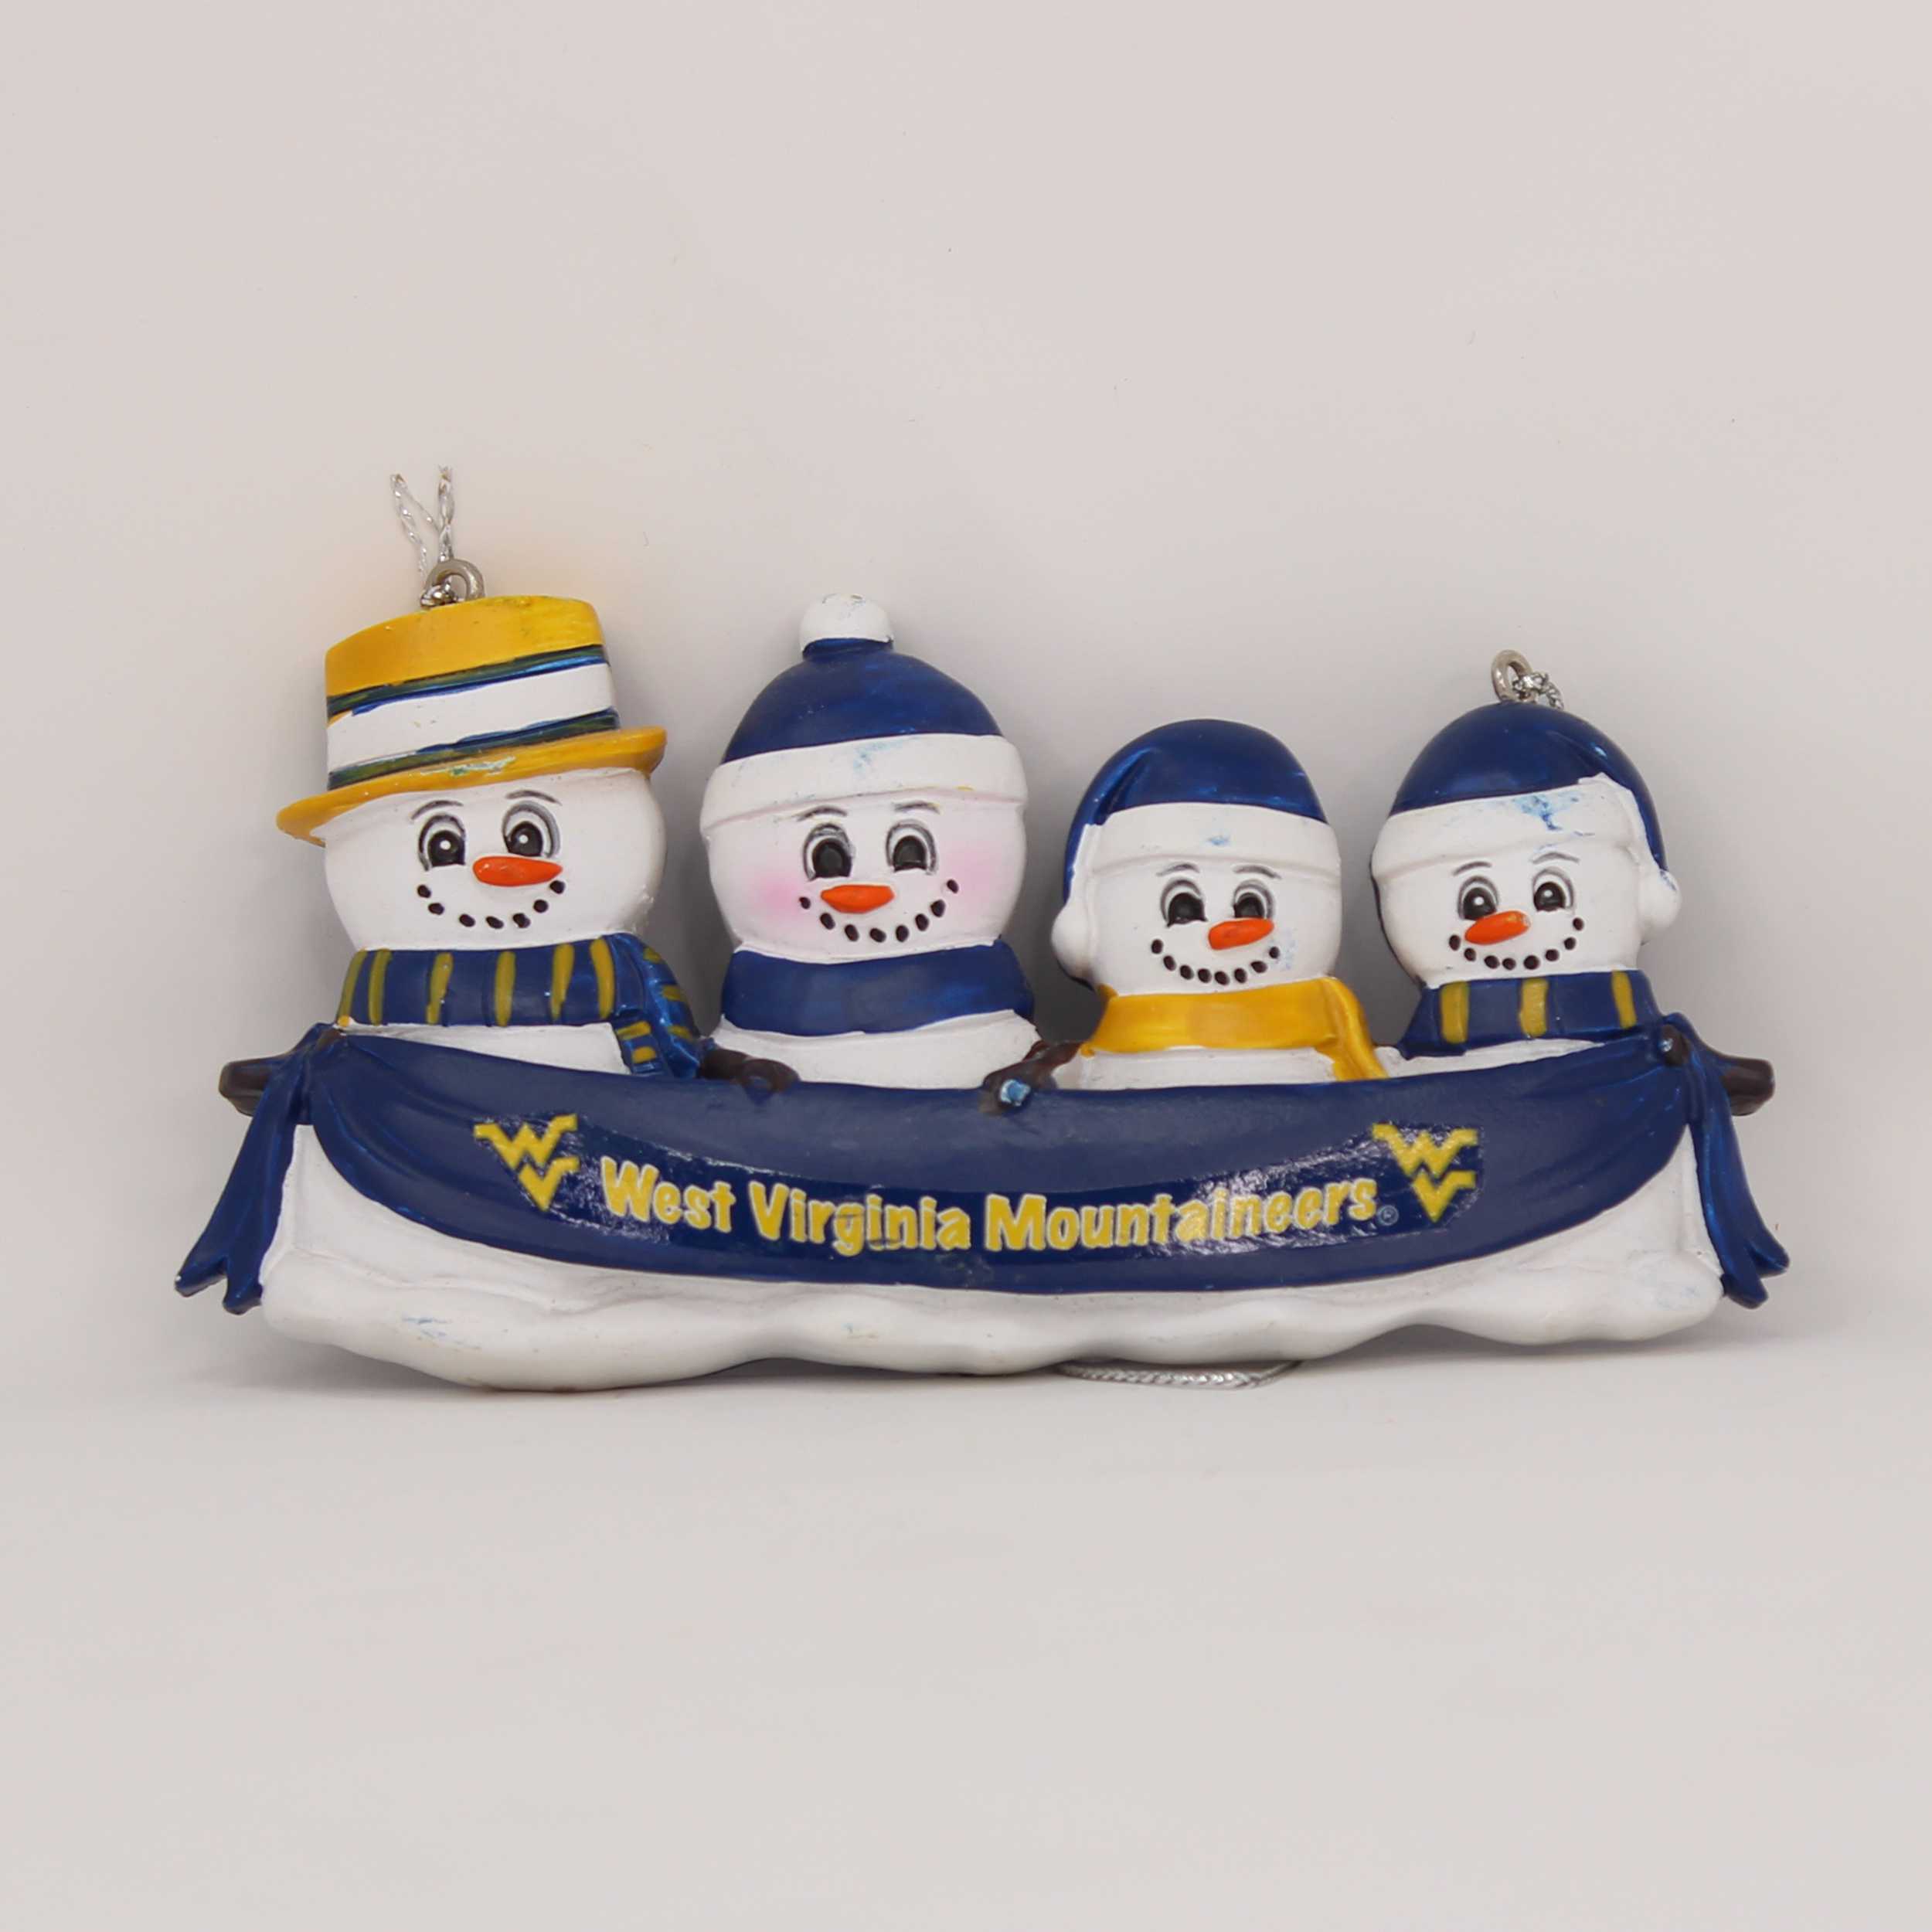 Personalized Family Ornament West Virginia Mountaineers